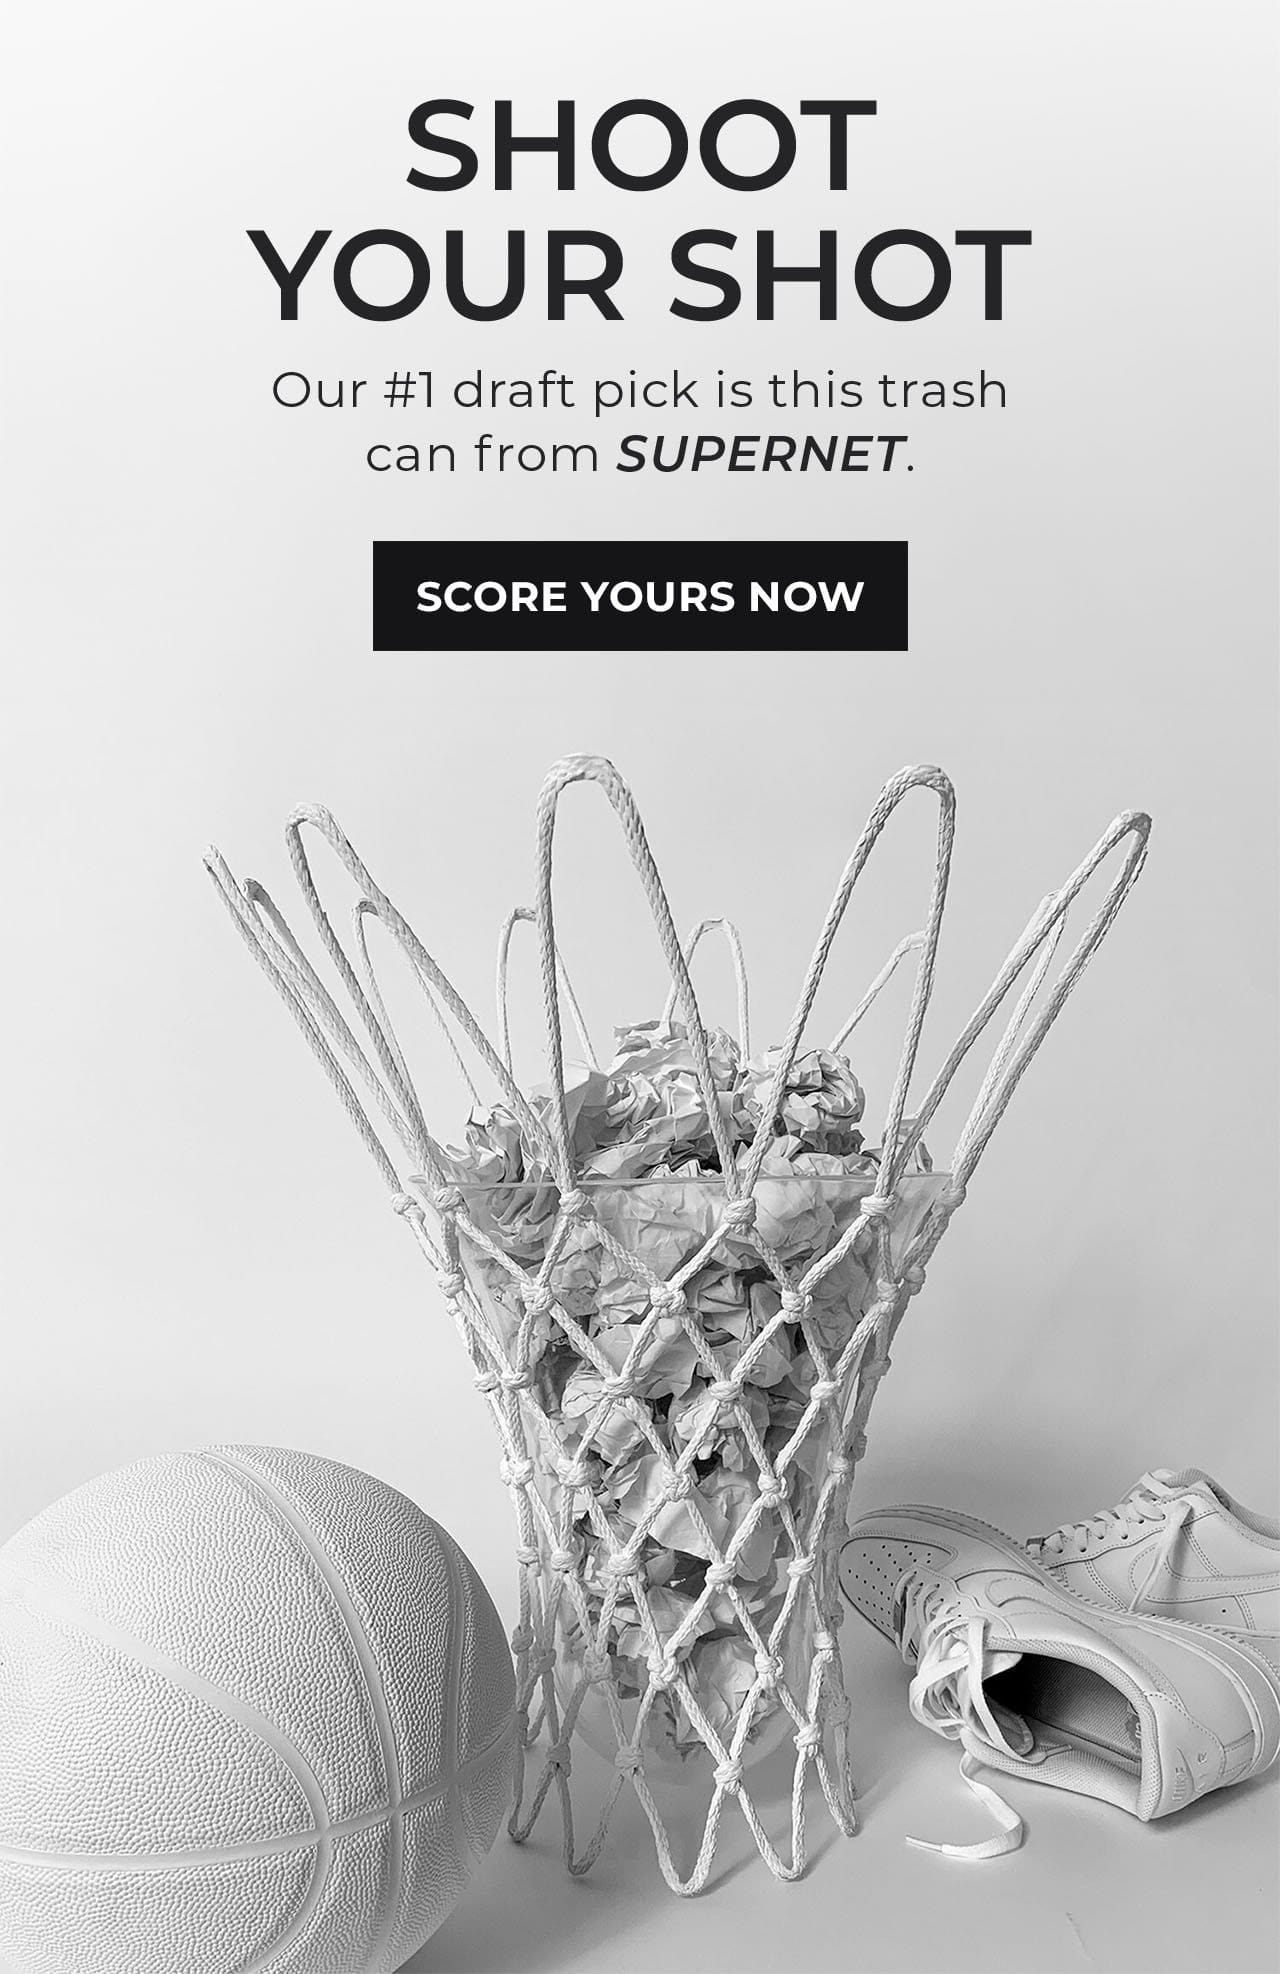 Basketball Net Garbage Cans | SHOP NOW